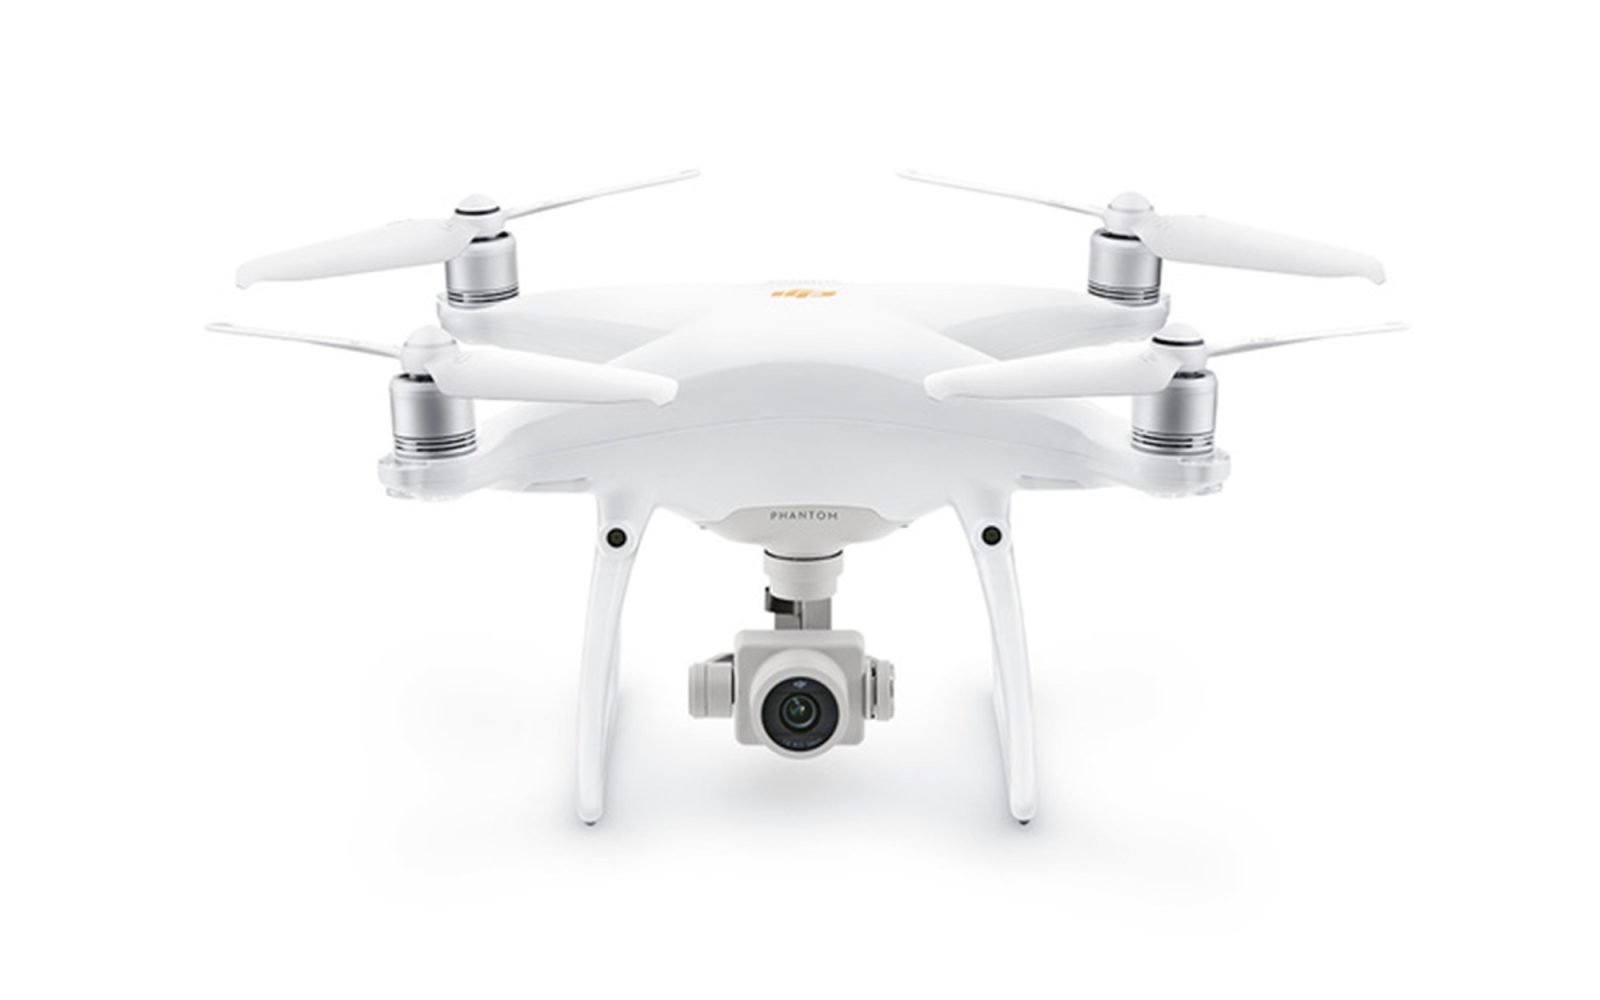 DJI quietly releases the Phantom 4 Pro V2.0 - photos, specs, available starting today